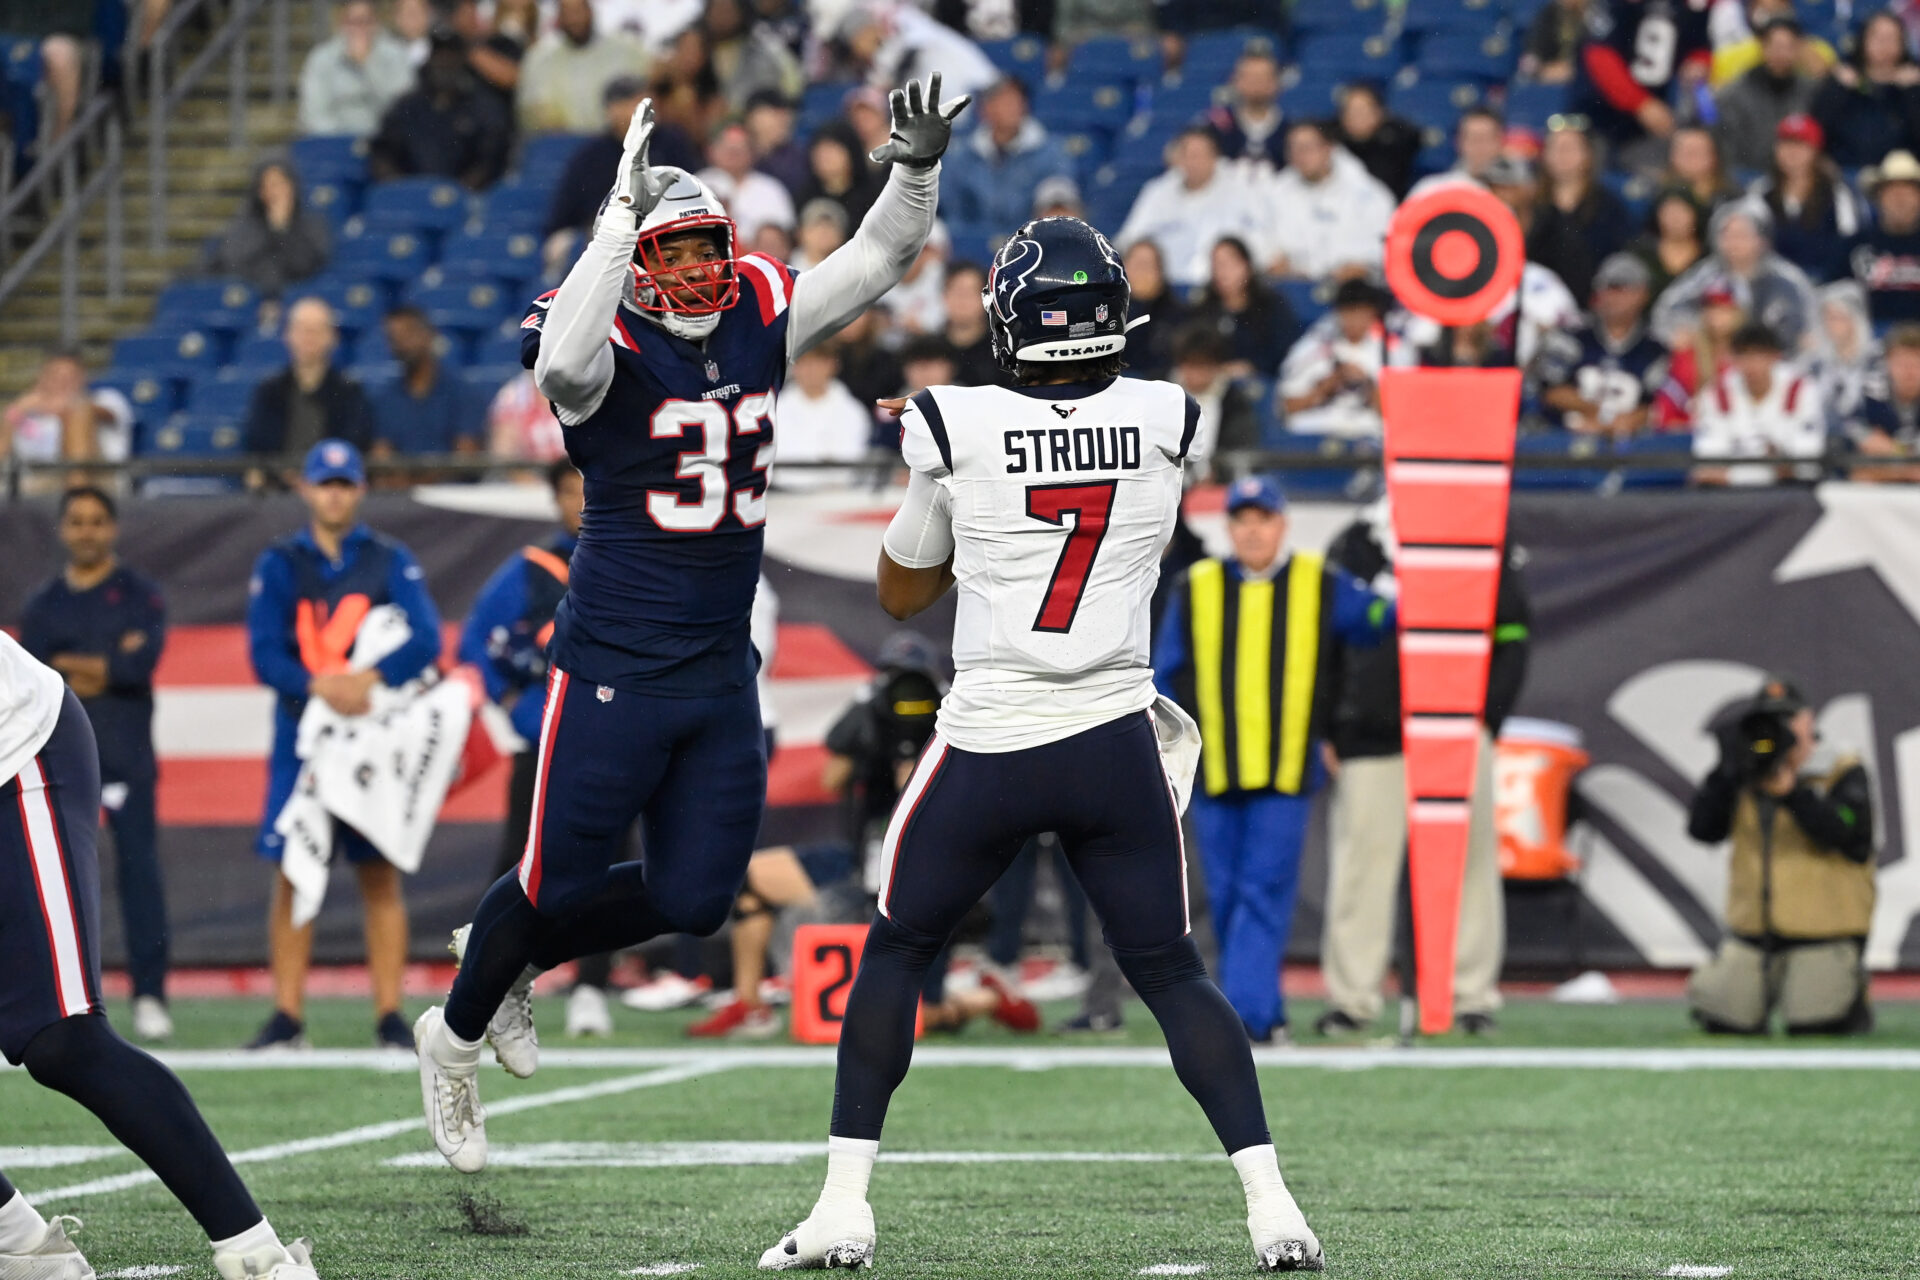 C.J. Stroud tries to throw a pass as a Patriots defender jumps into the air to try to block the pass